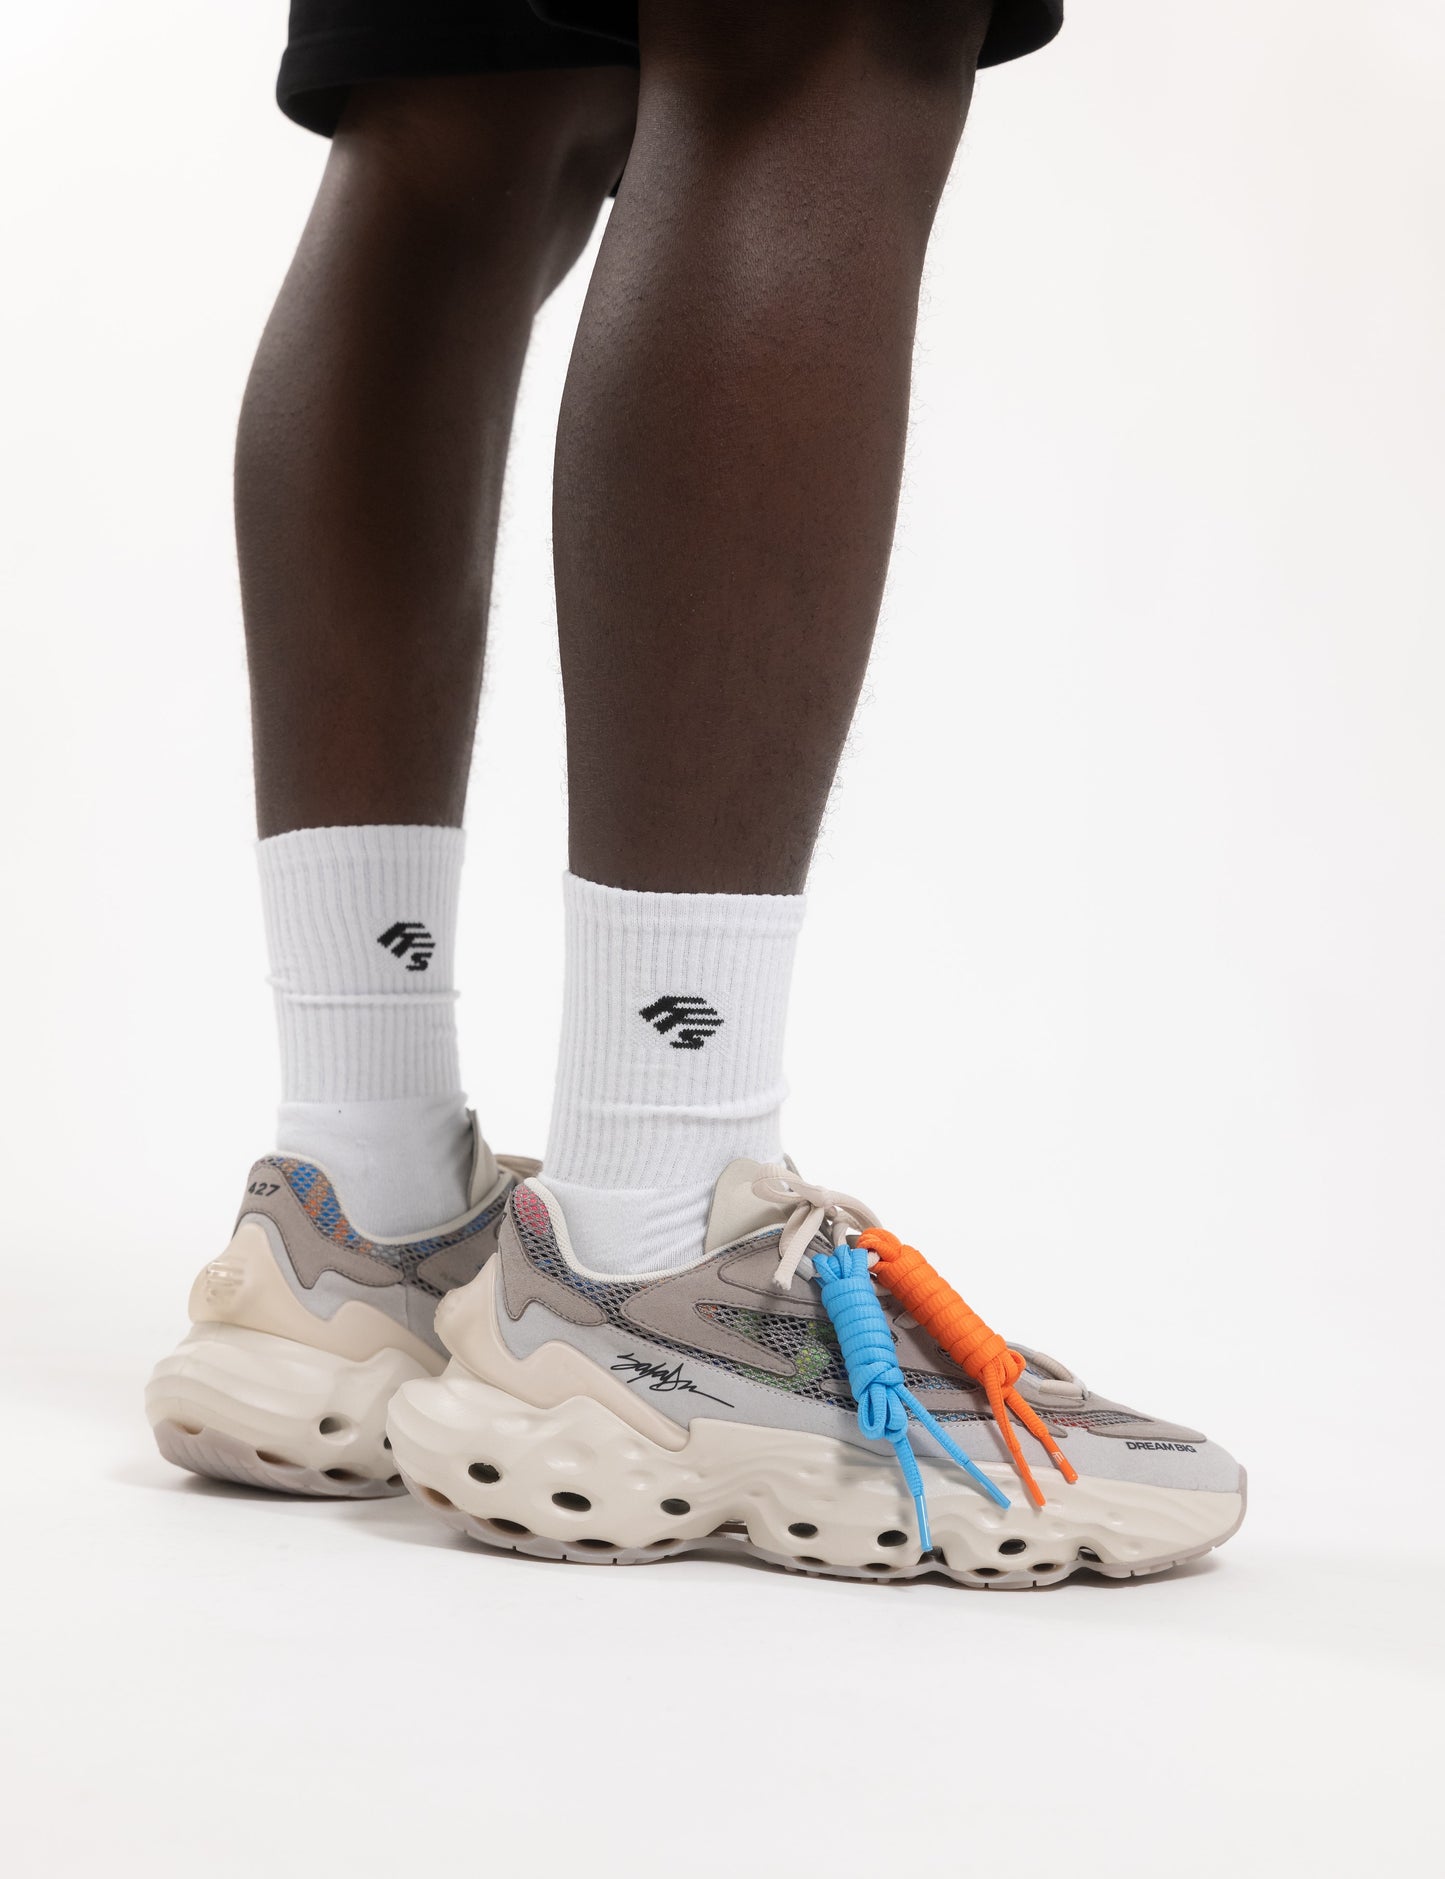 Flowers for Society Sneaker Seed.One King Saladeen collaboration lateral worn by model standing straight